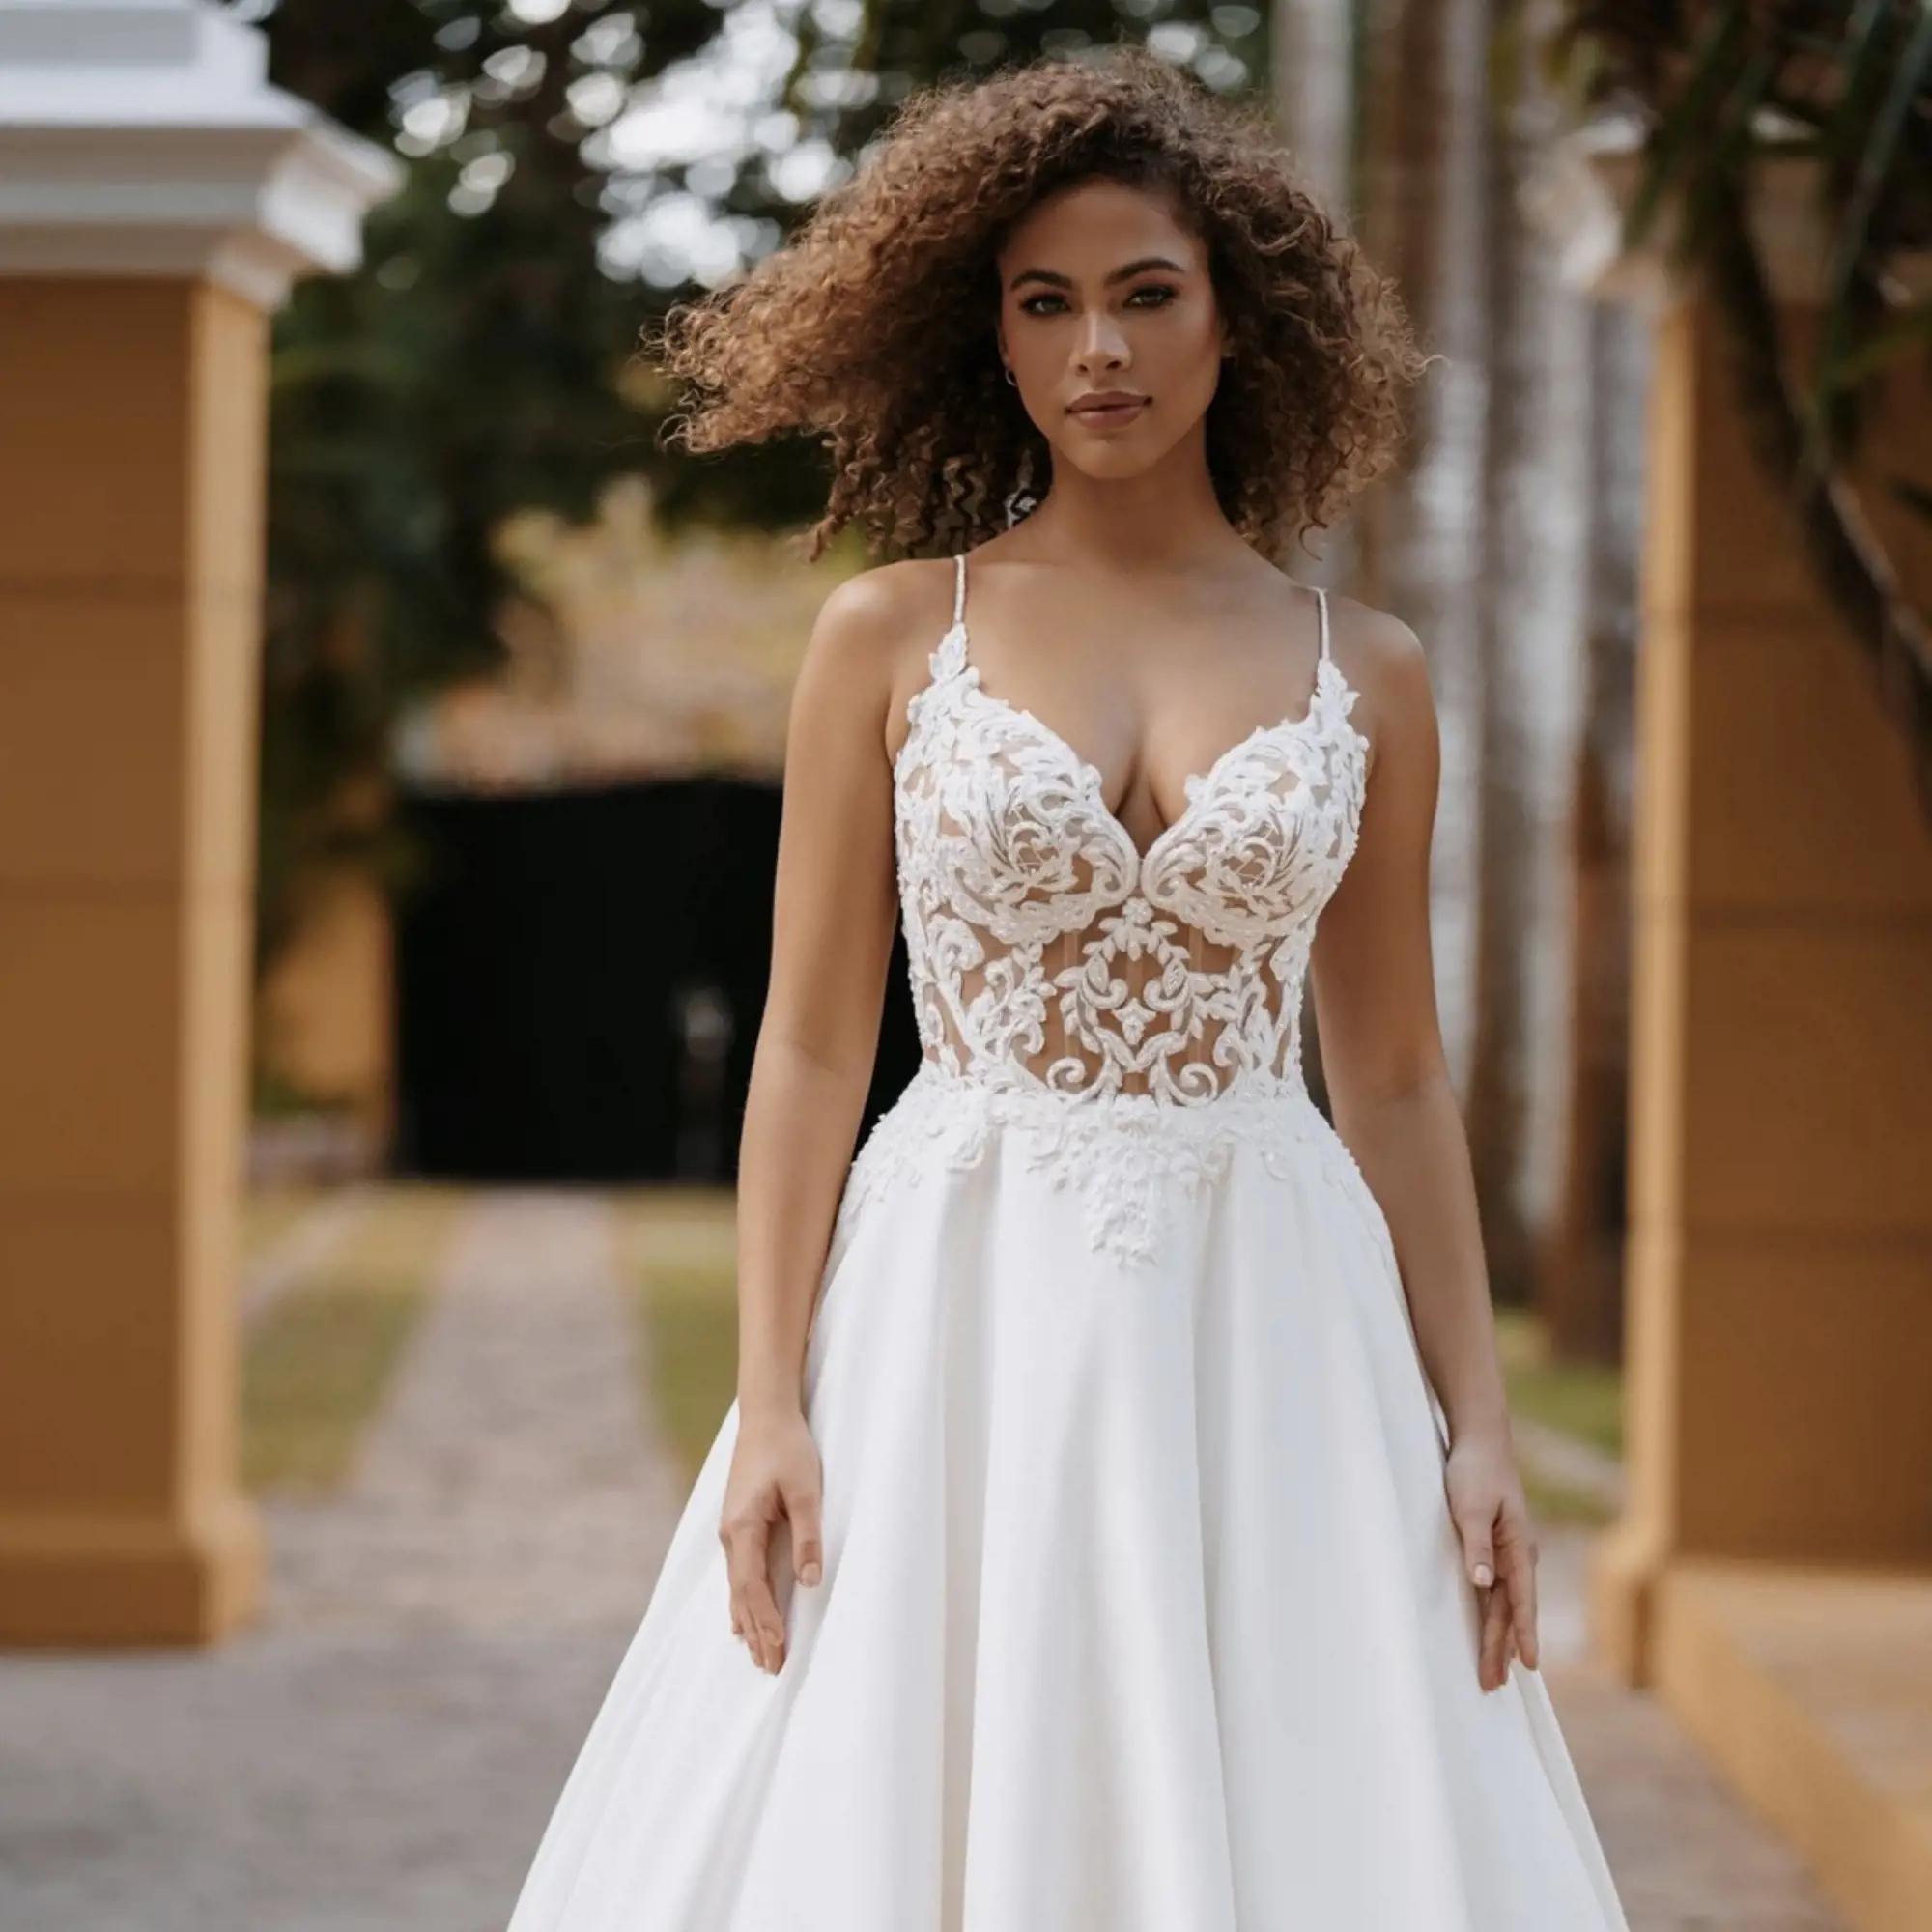 Grace inverted triangle body shape bridal gown suggestions.  #weddingdaystyle #weddinggowns #weddings #styleguide #bodyshapeguide